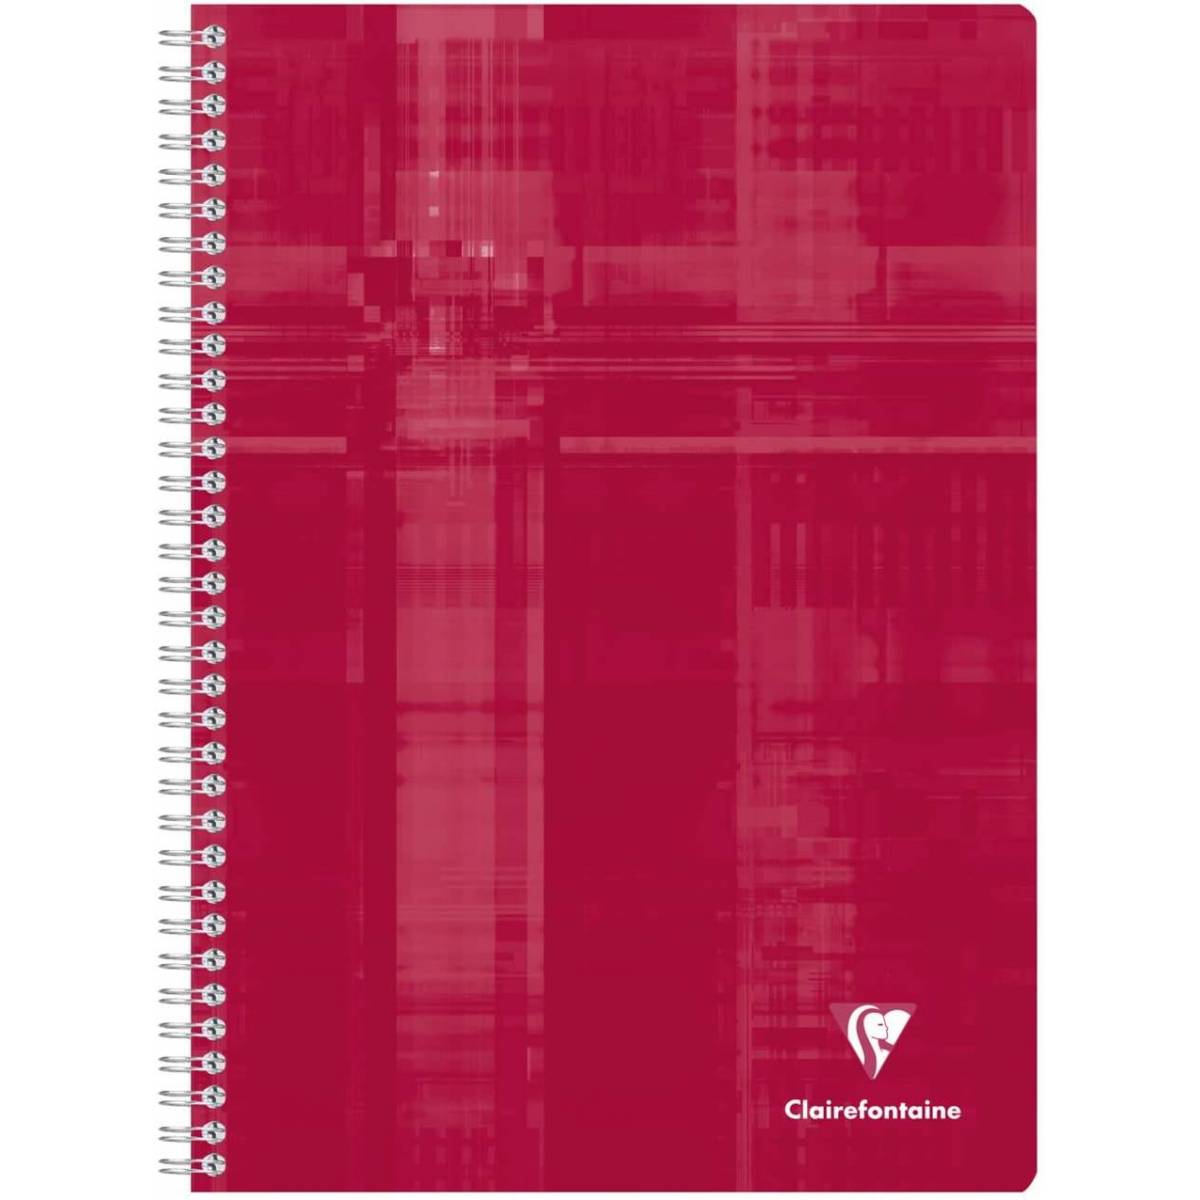 Cahier Clairefontaine Spirale 21x29.7 cm 148 pages Grands Carreaux